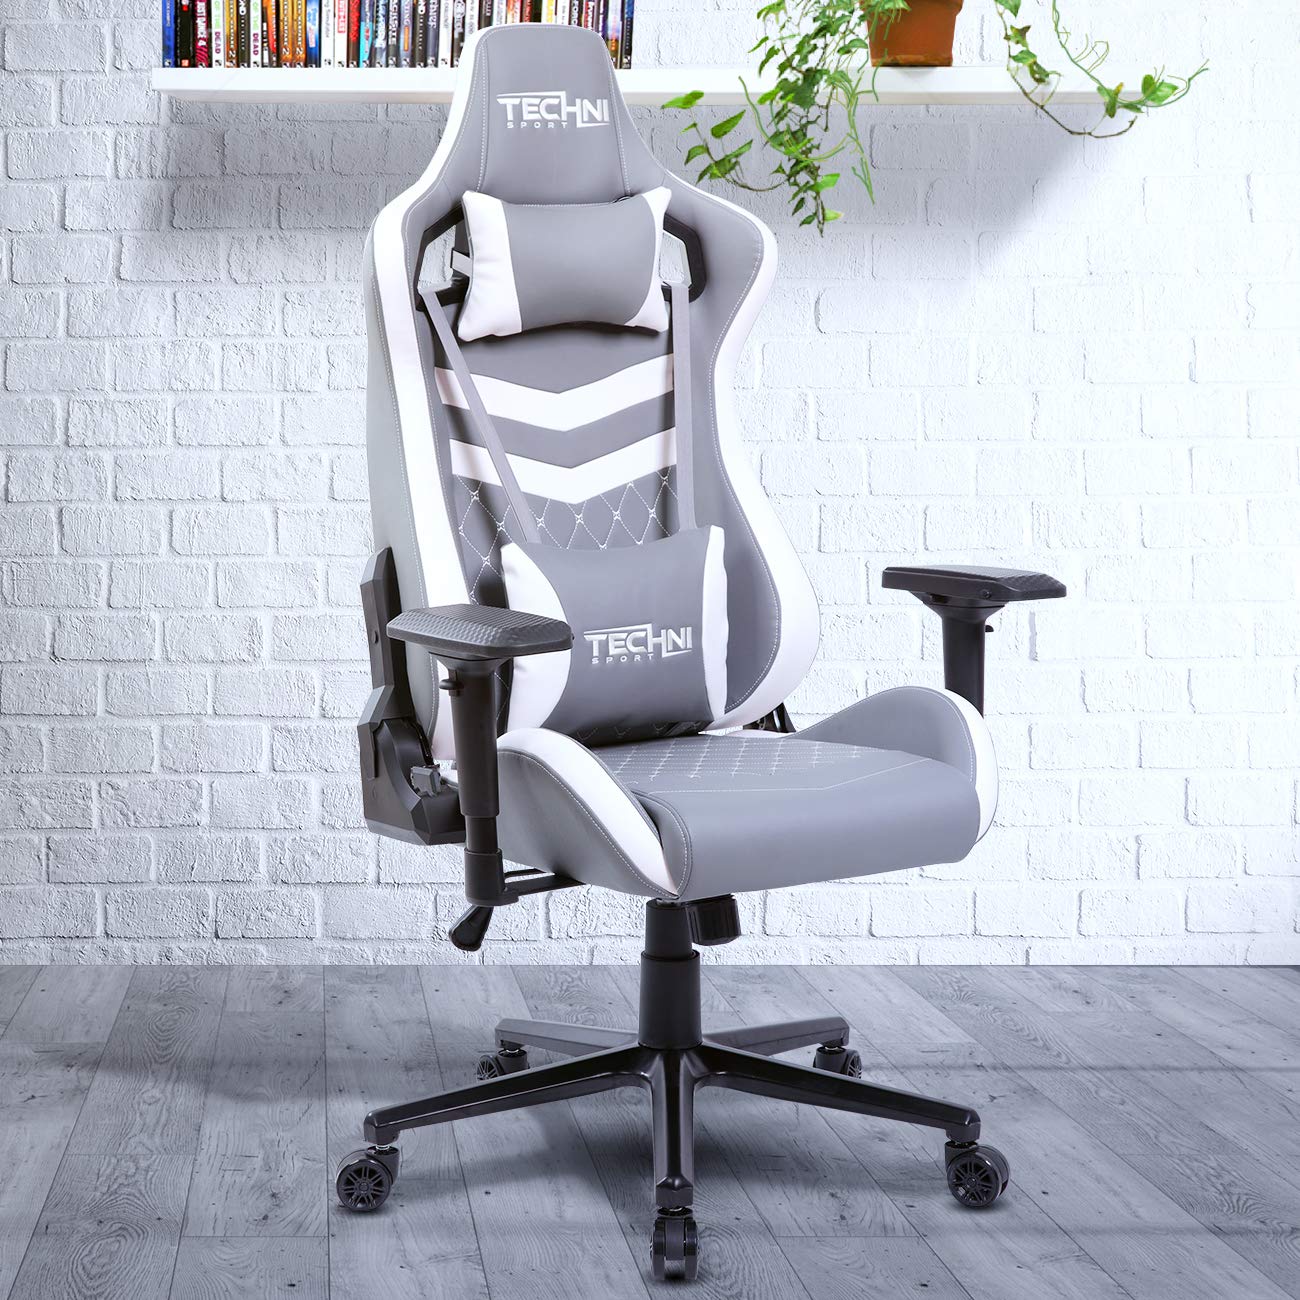 Techni Mobili High Back Gaming Chair - Gray and White